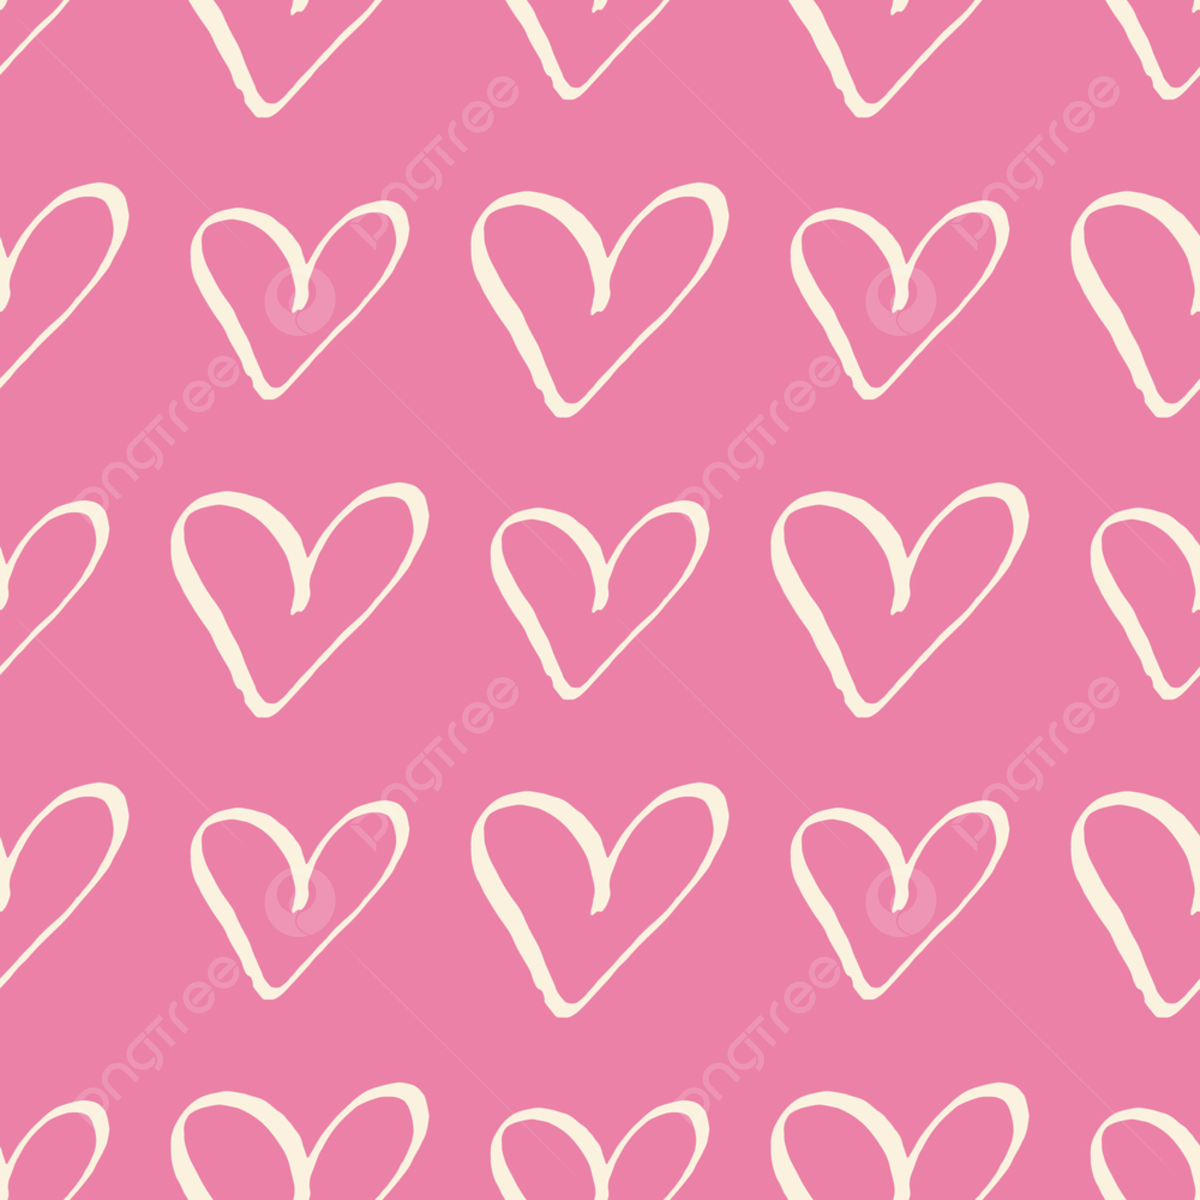 Pastel Cream Hearts On Pink Trendy Seamless Pattern Romantic Valentine Colorful Background, Wrapping, Blog, Artistic Background Image for Free Download